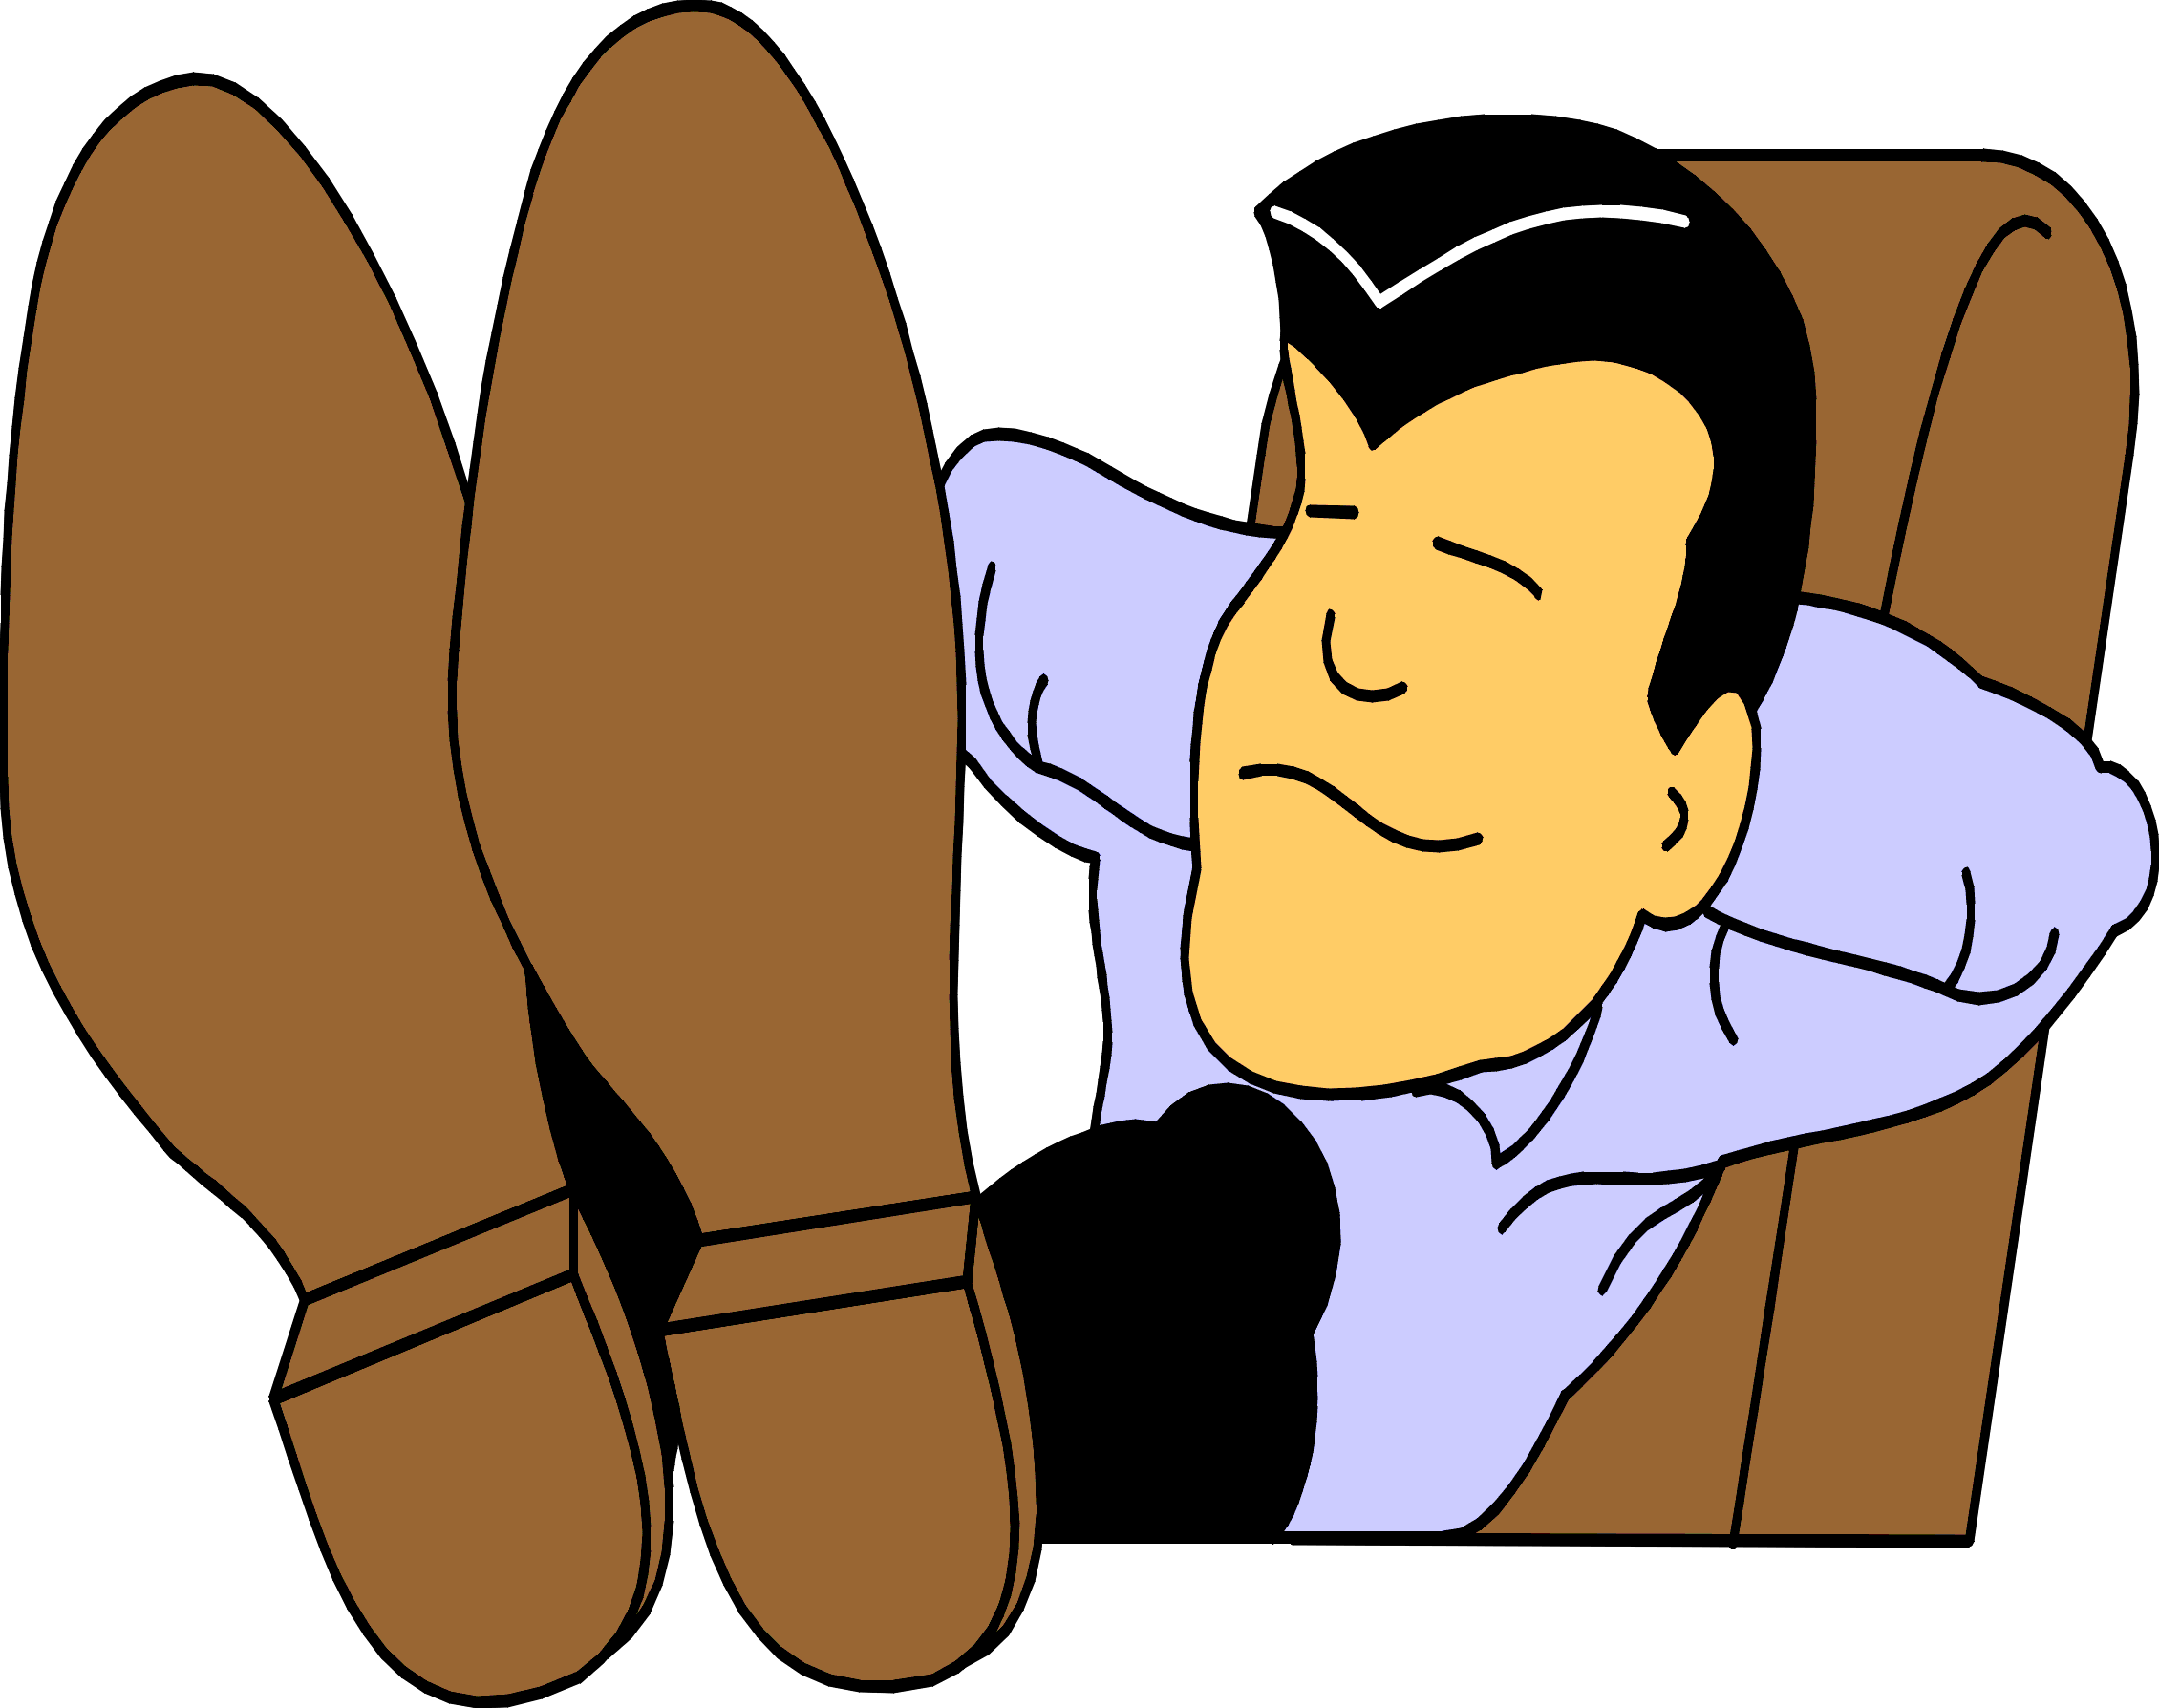 Clip Arts Related To : relaxing man clipart. 